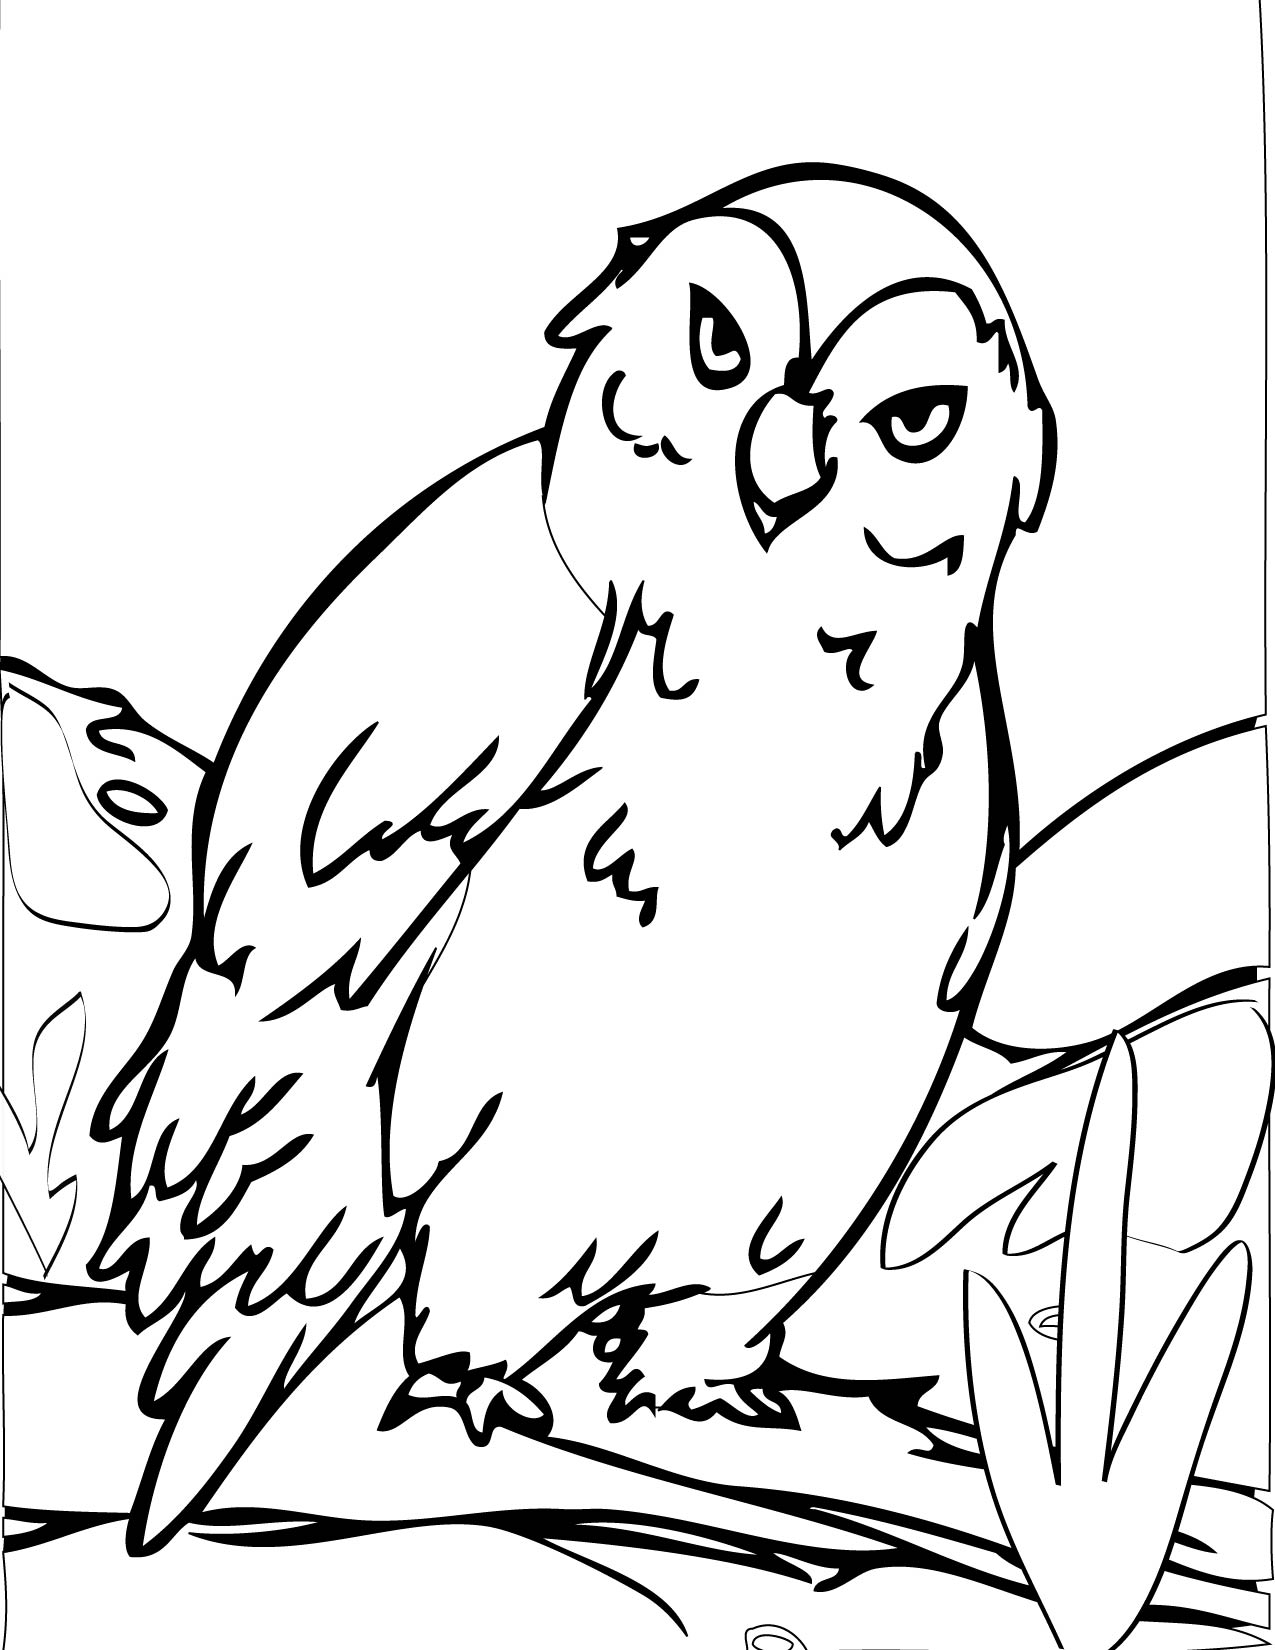  Owl Coloring Pages | Coloring page | #17